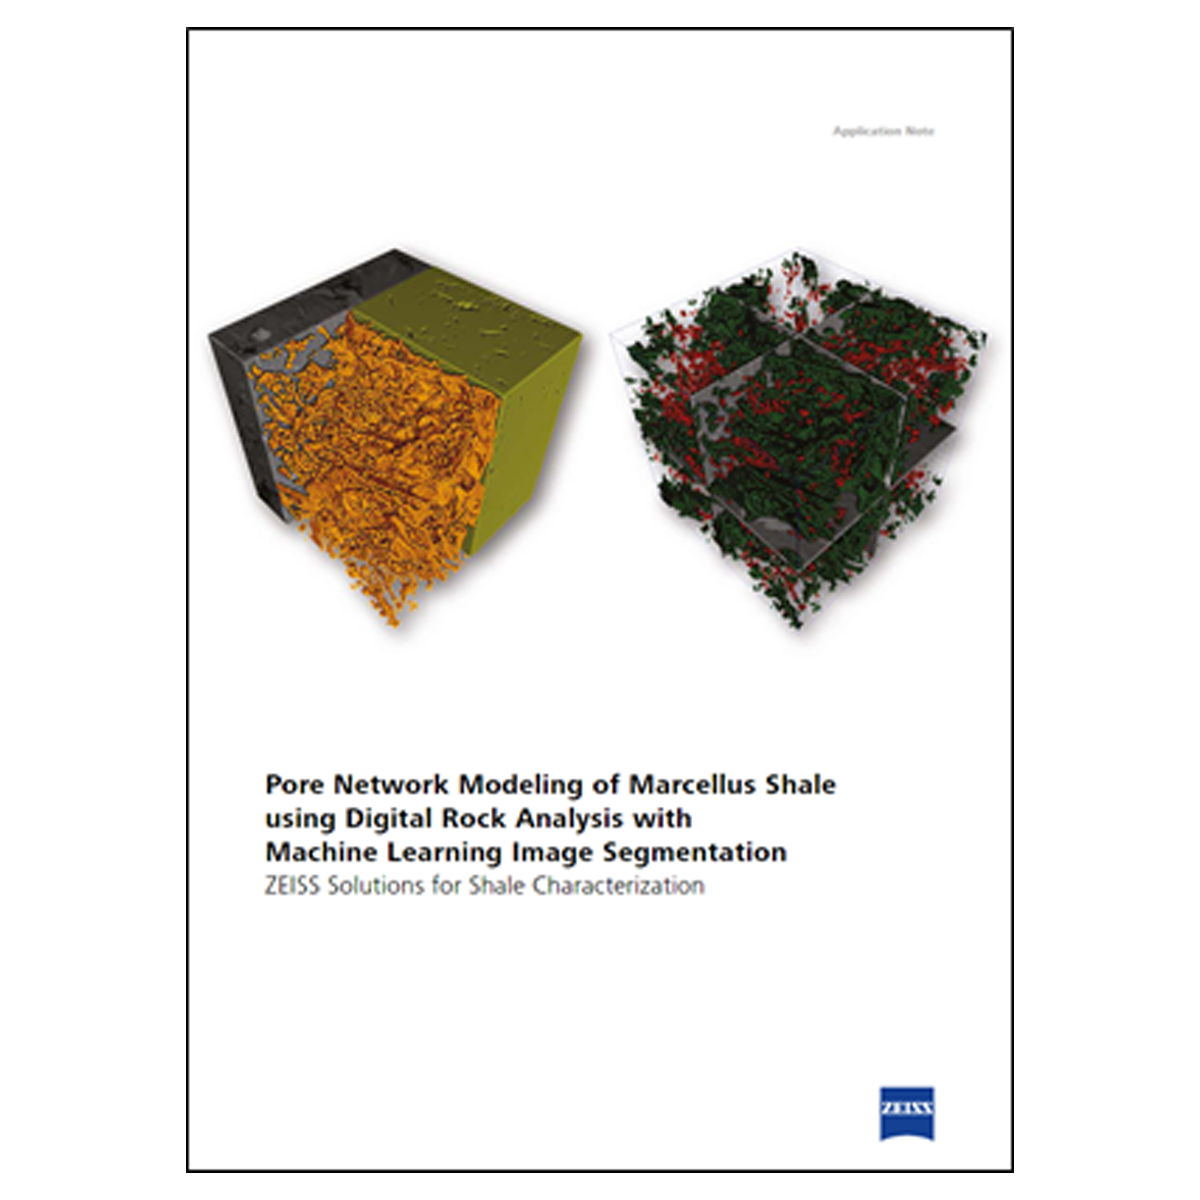 Pore Network Modeling of Marcellus Shale